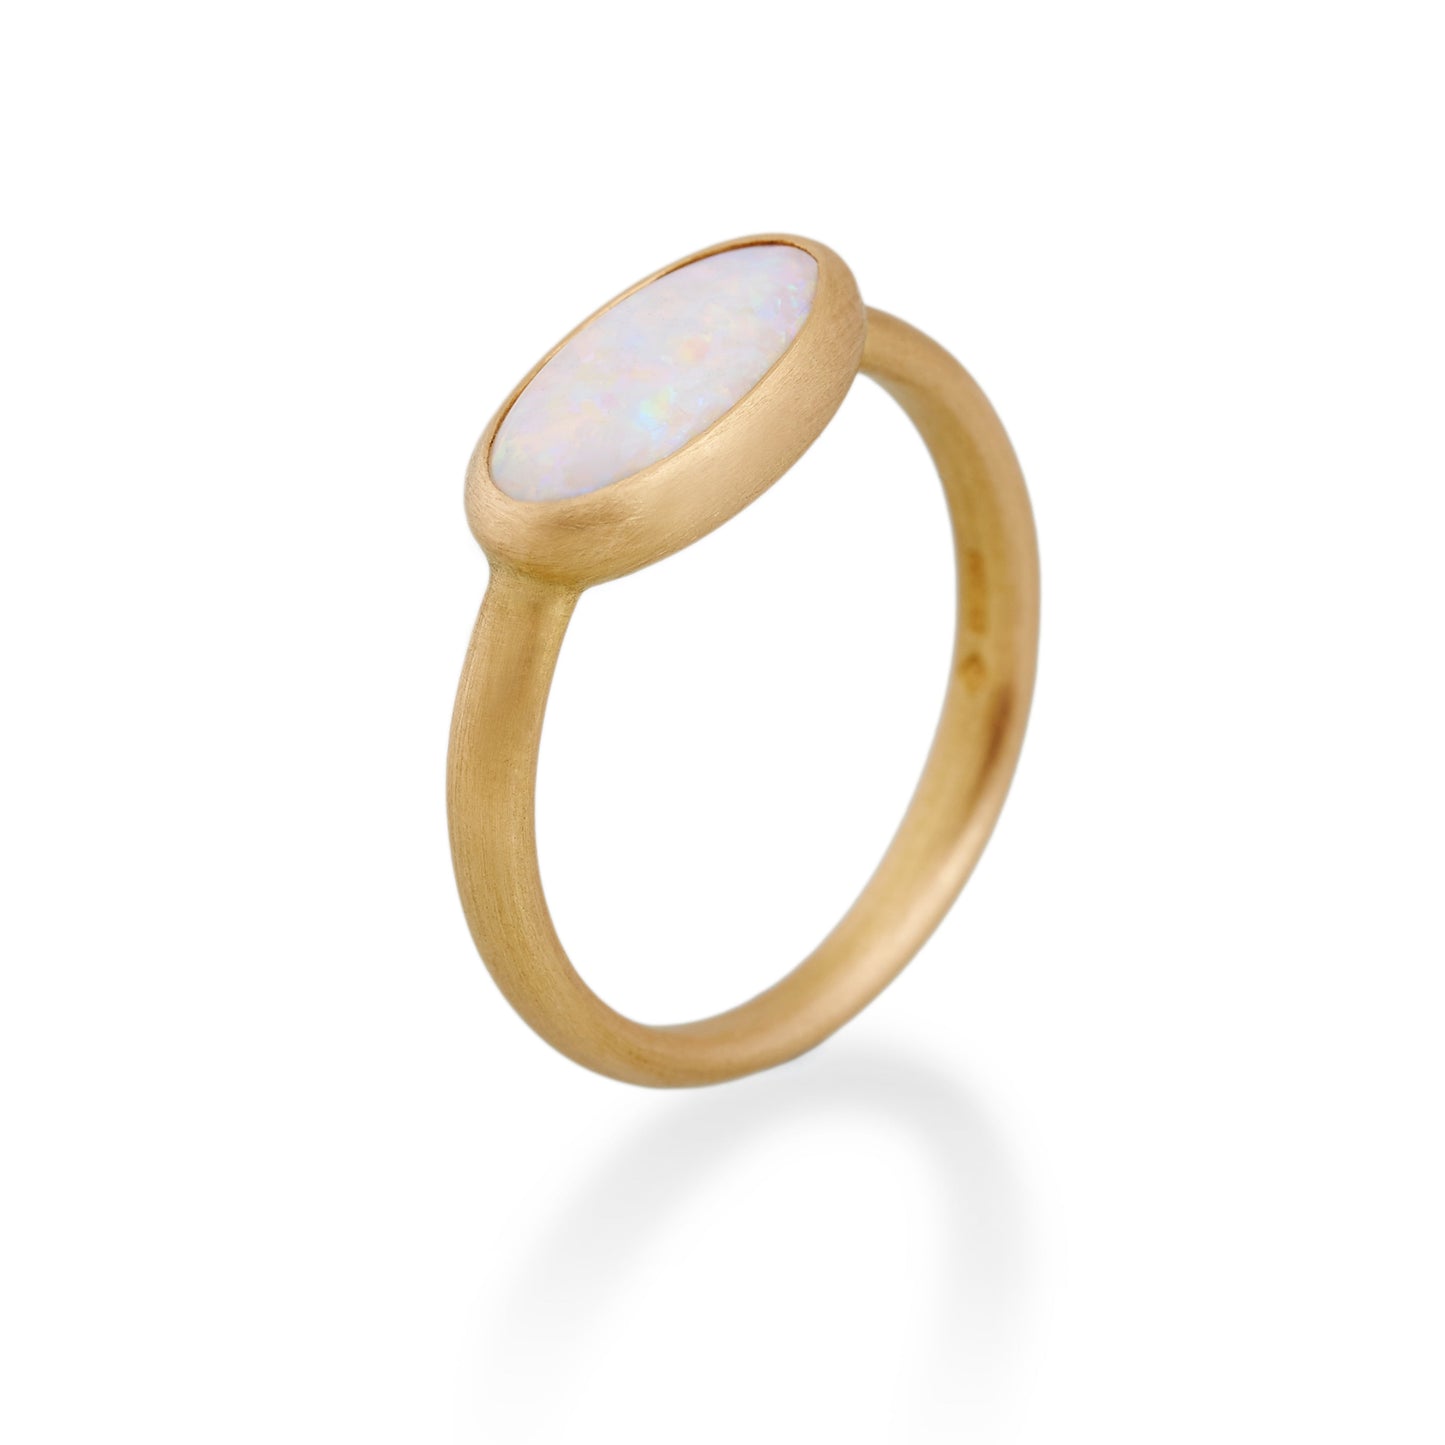 White Opal Long Oval Ring, 22ct Gold